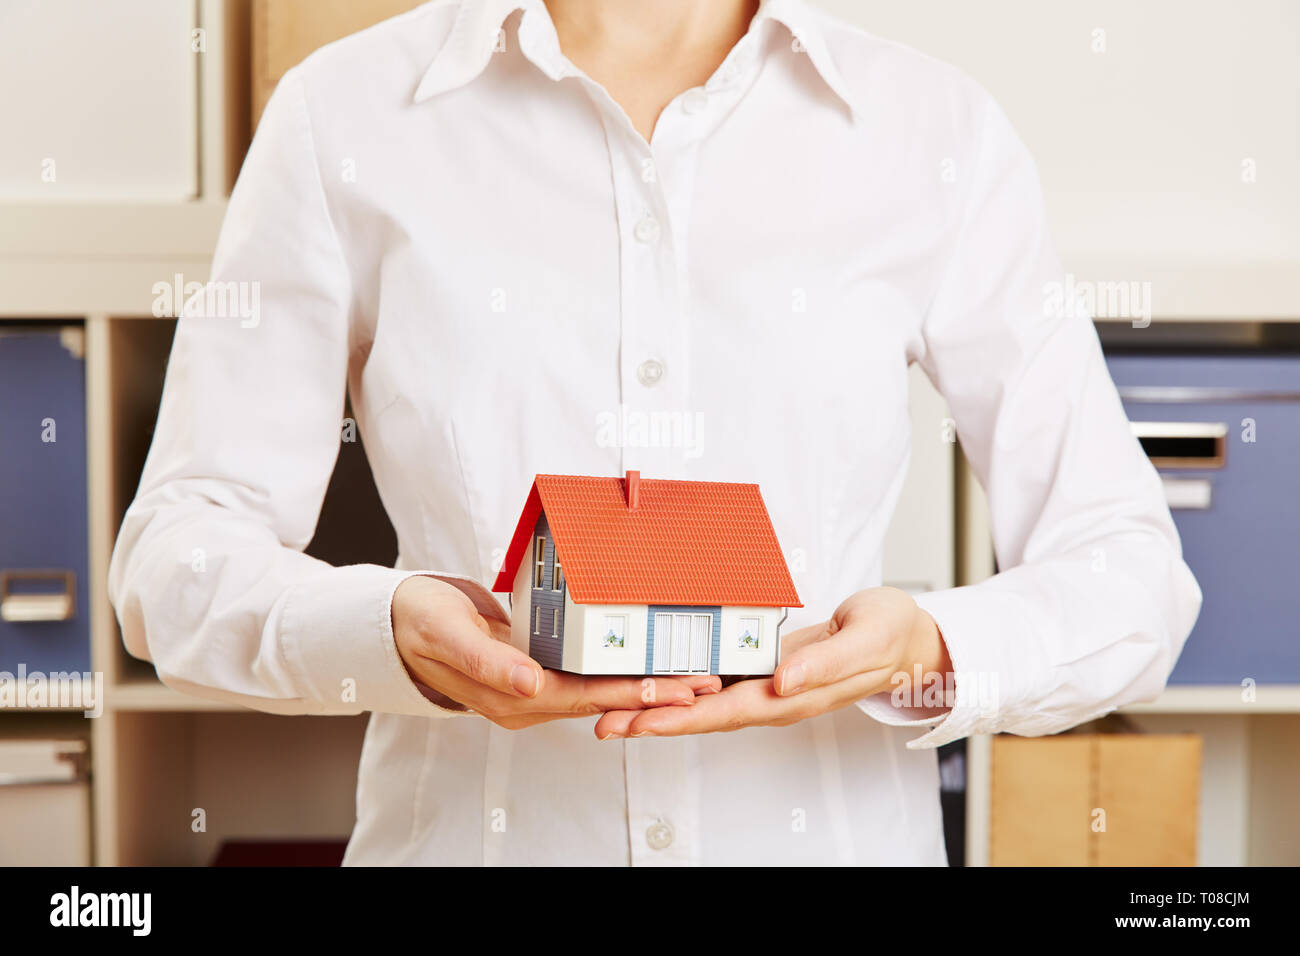 Hands of a woman hold a small house as a concept for mortgage lending Stock Photo